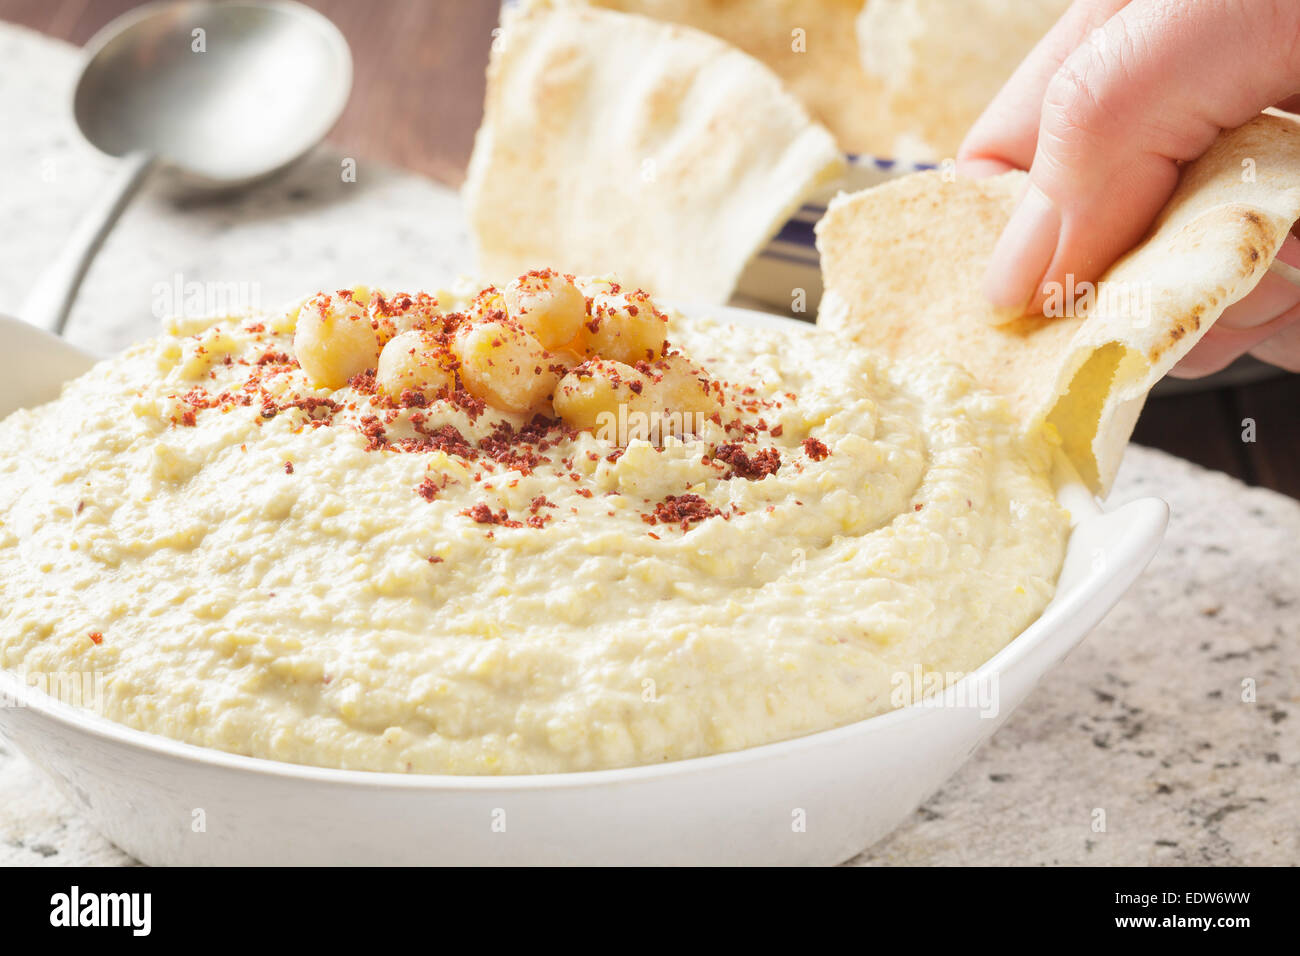 Hand dipping flat bread into hummus Stock Photo